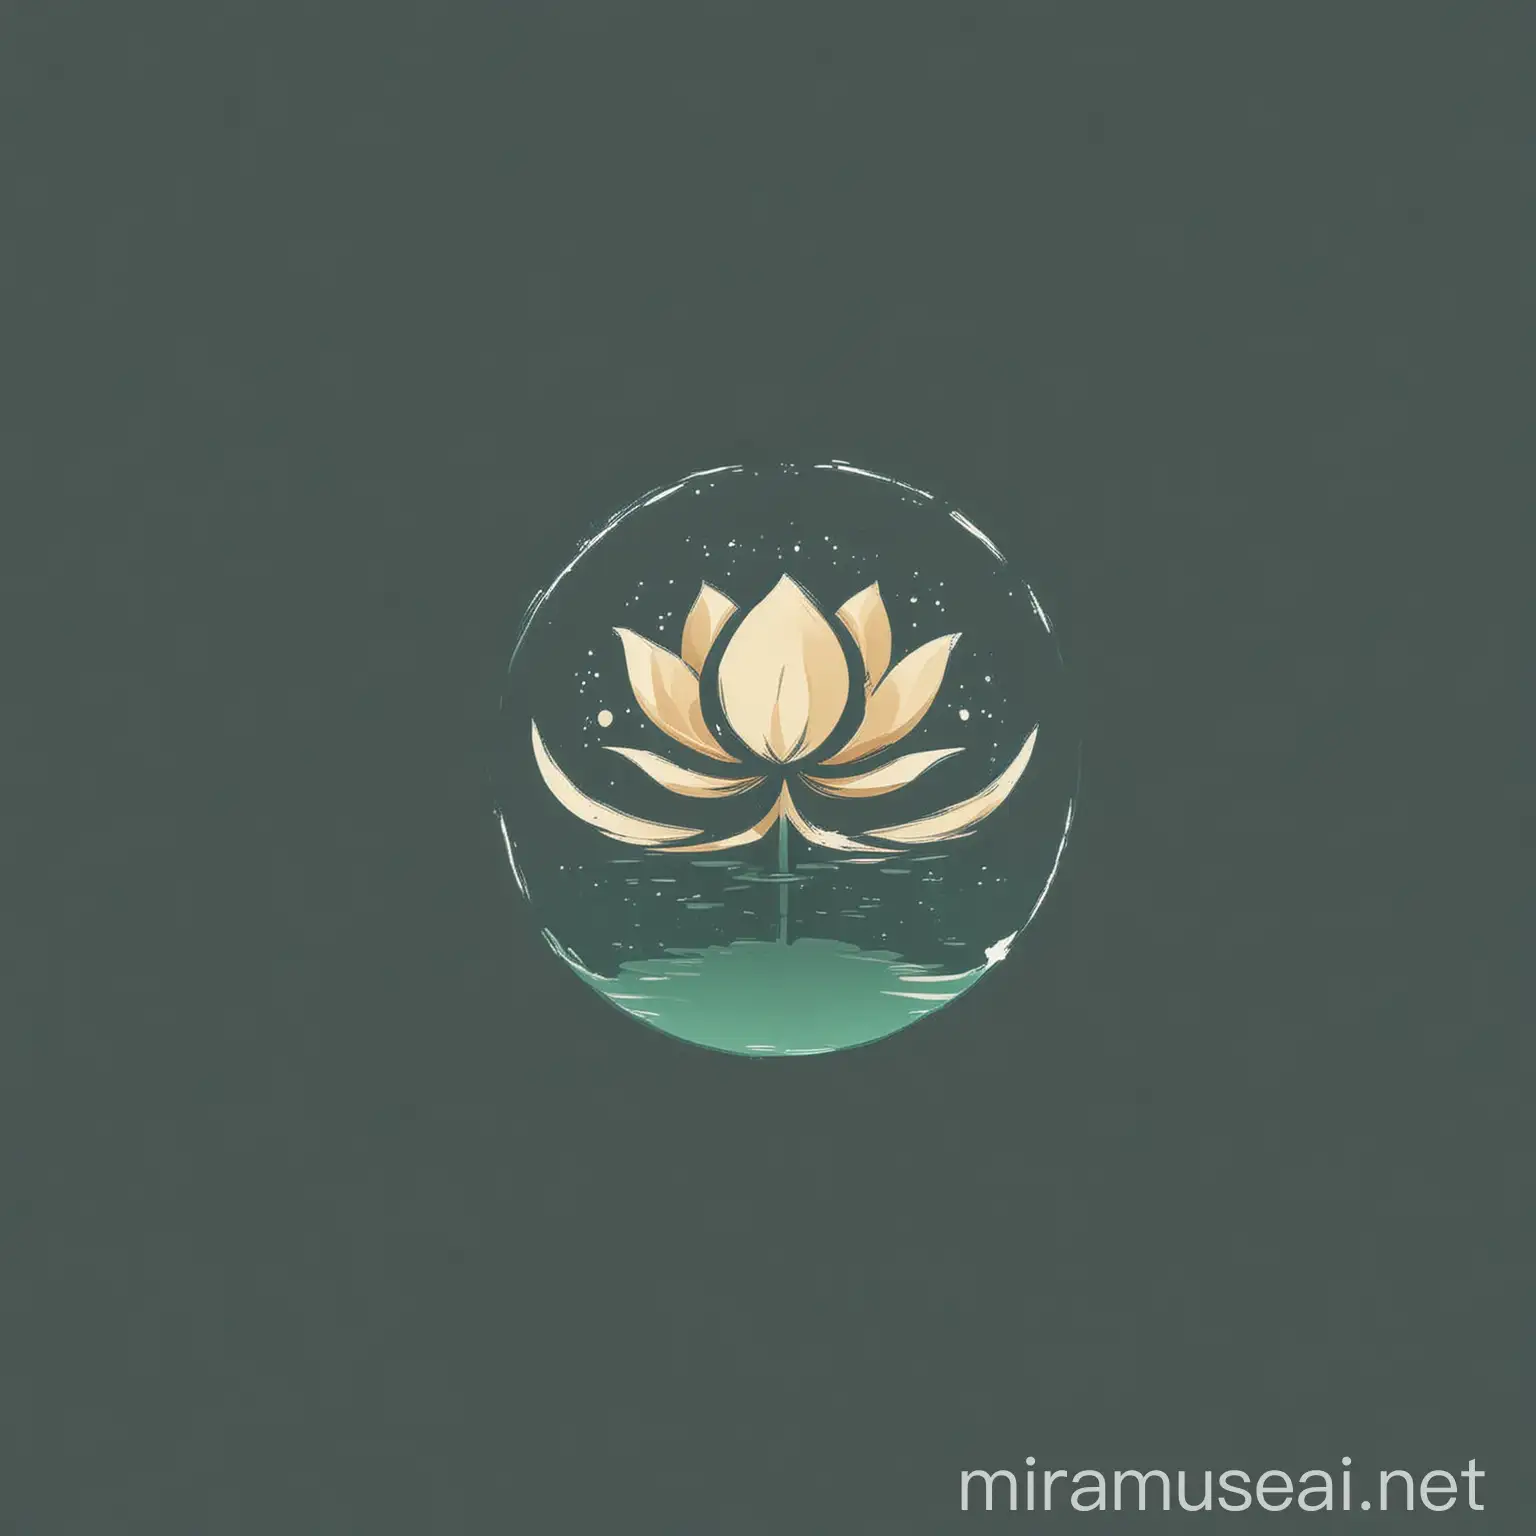 Lotus Flower Reflecting on Calm Water in Minimalistic Flat Design